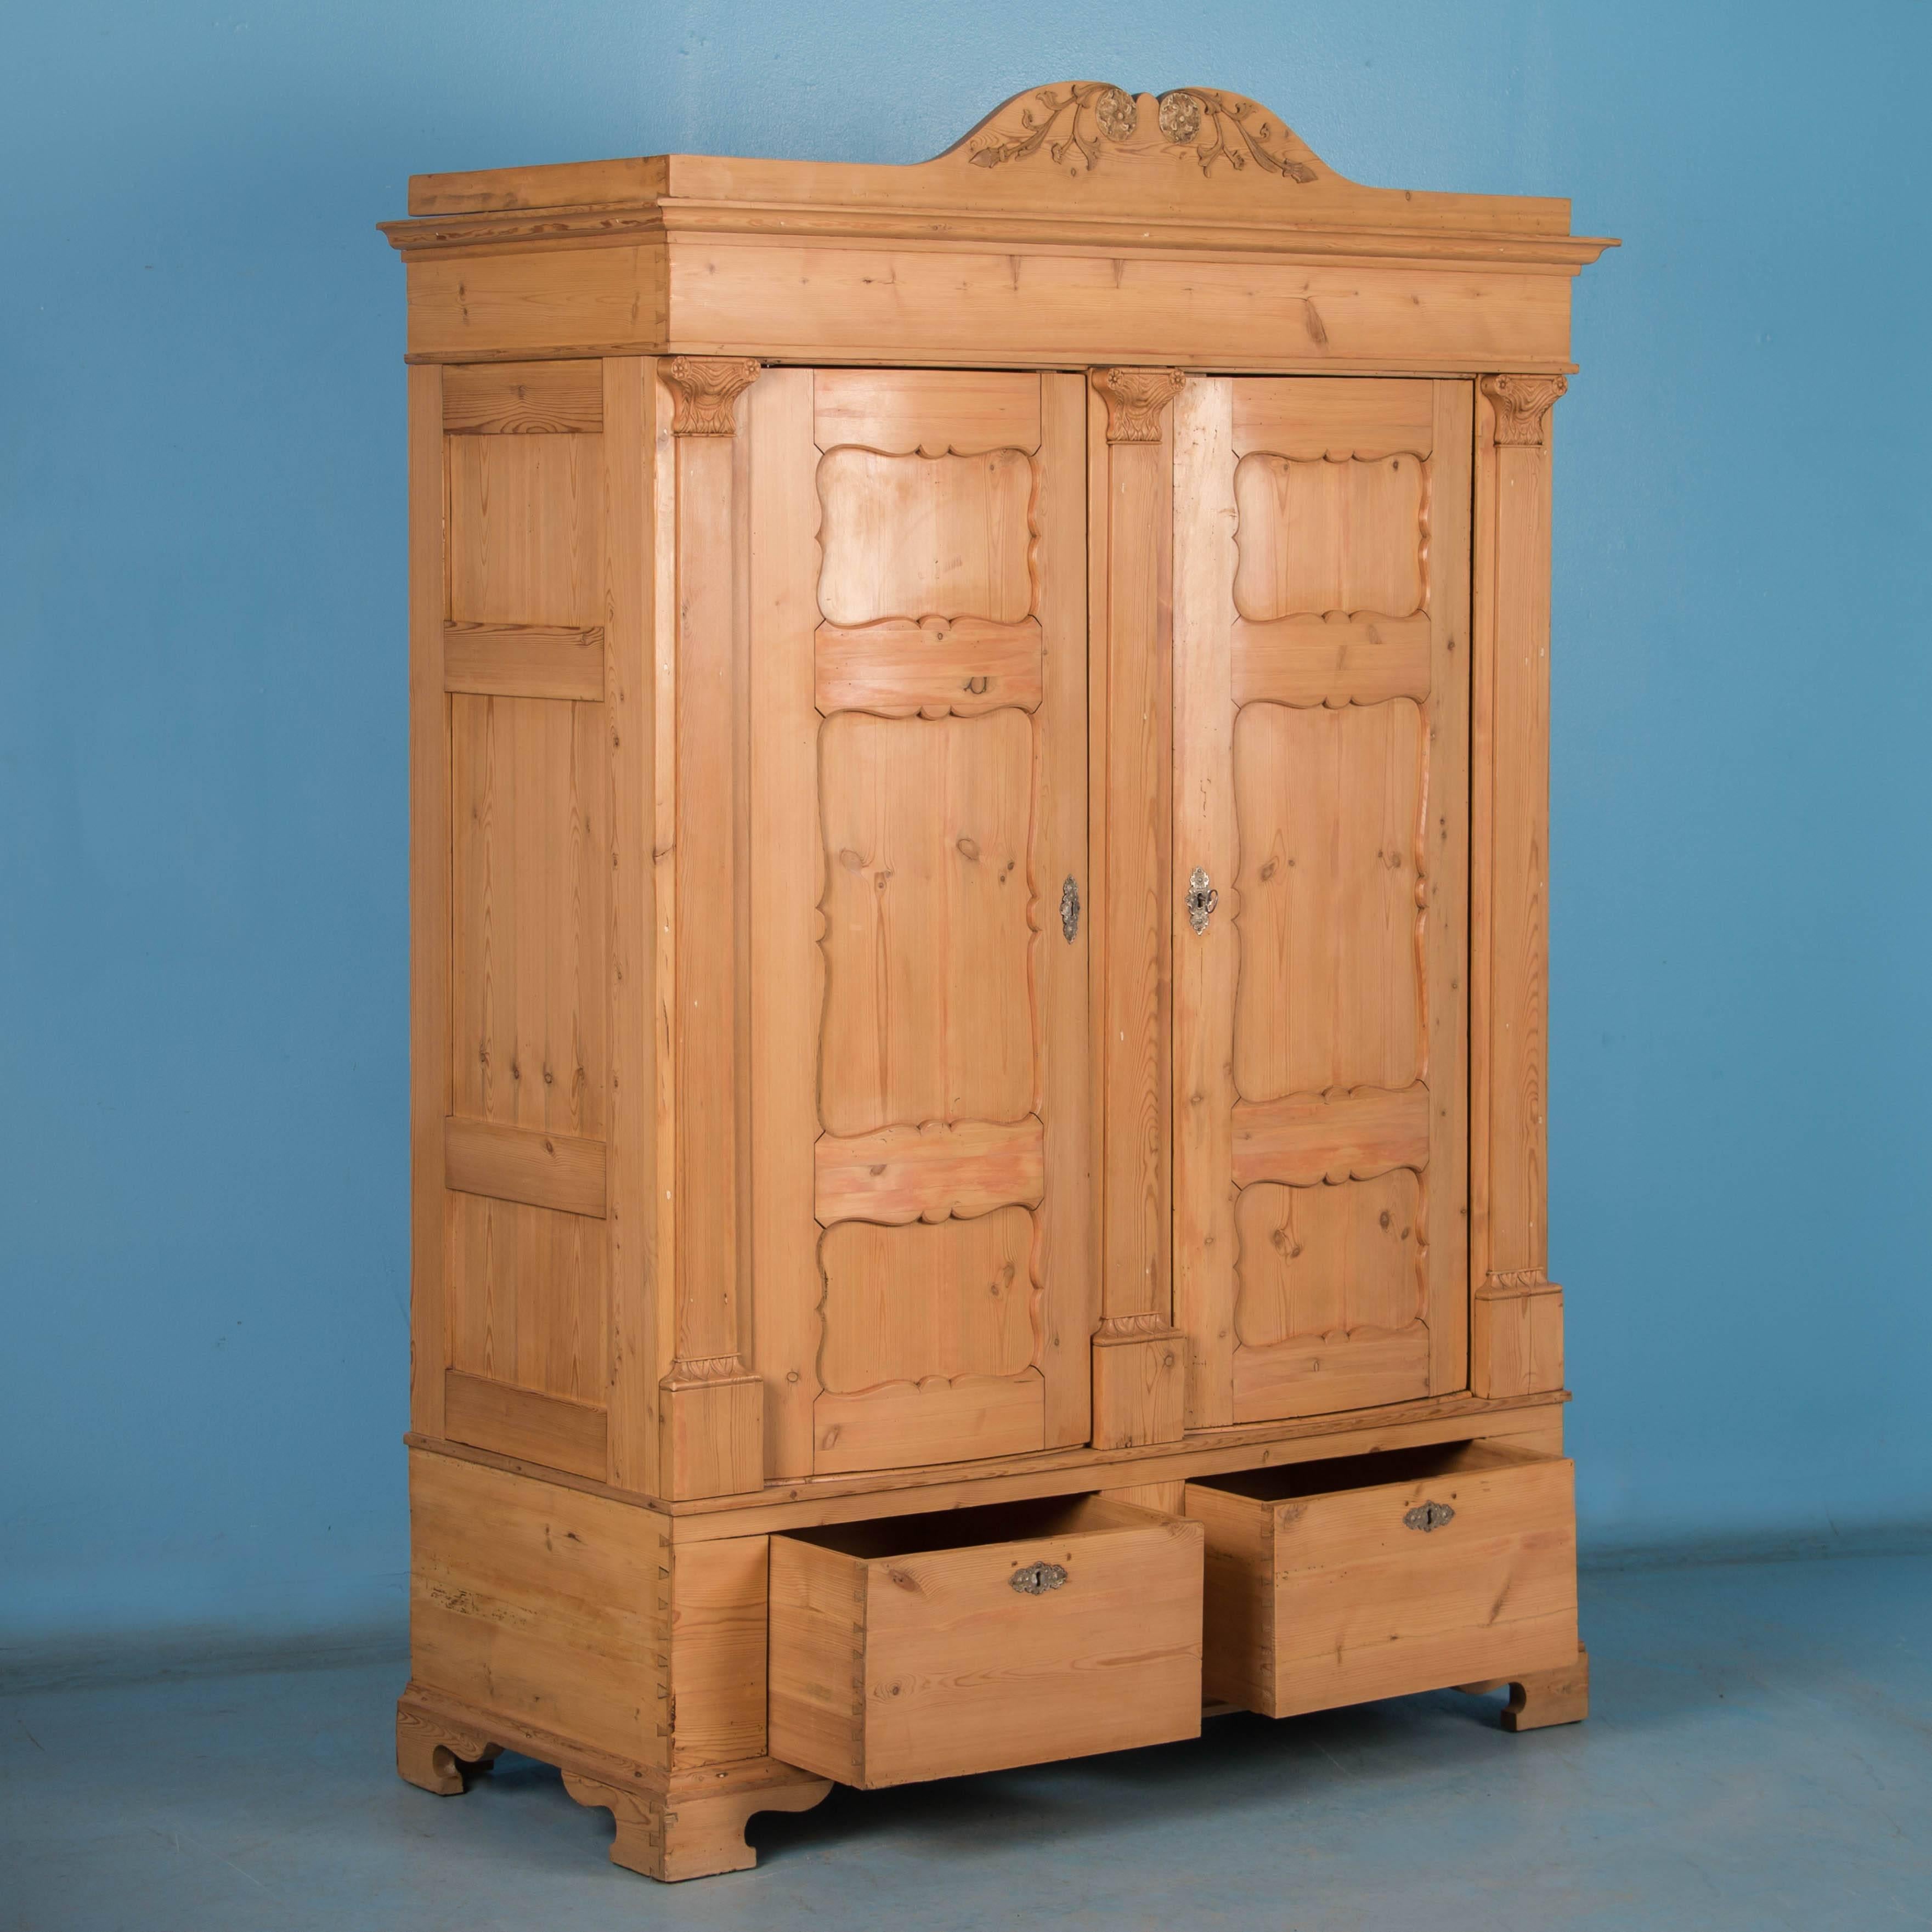 The beautiful pine seems to glow with life, taking on a warm patina from age and use in this striking armoire. Impressive in stature, this pine armoire has a strong visual presence as the eye is drawn upward to the delicate carved details of the